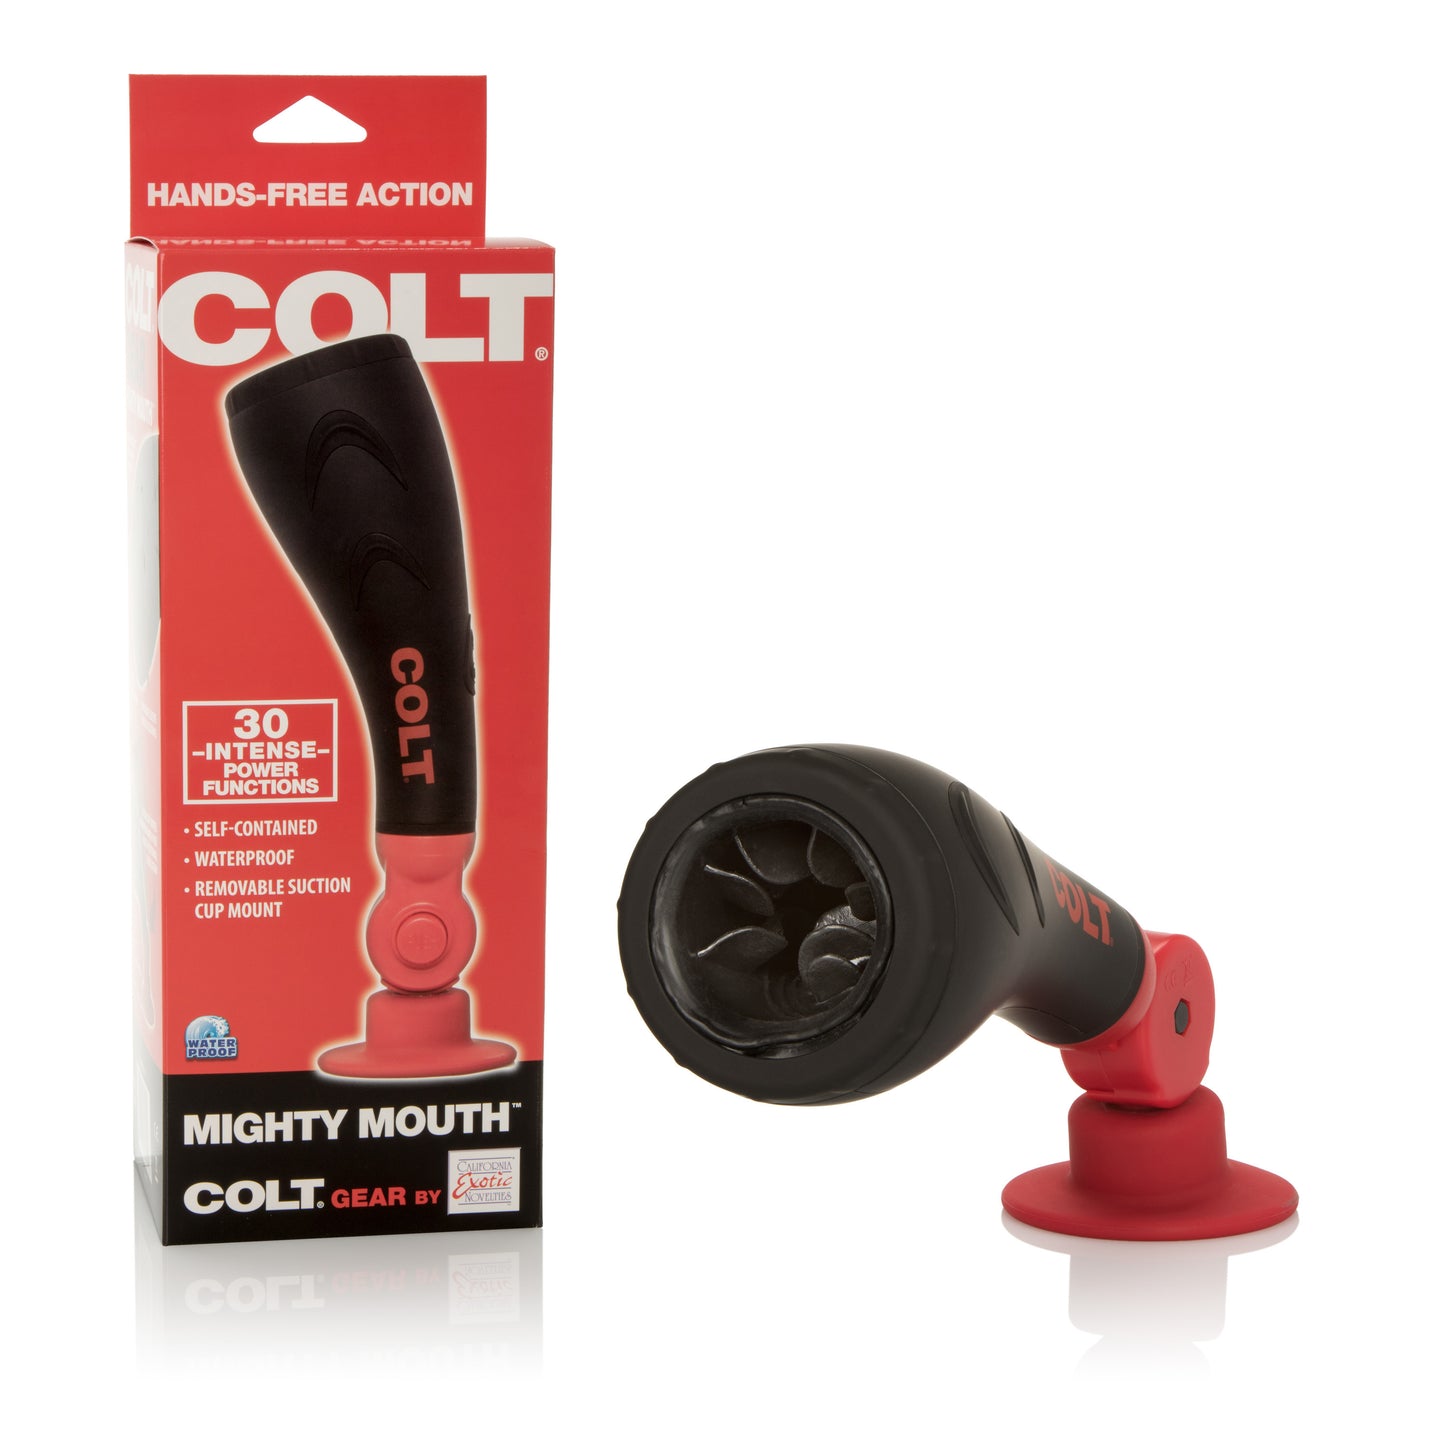 Colt Mighty Mouth